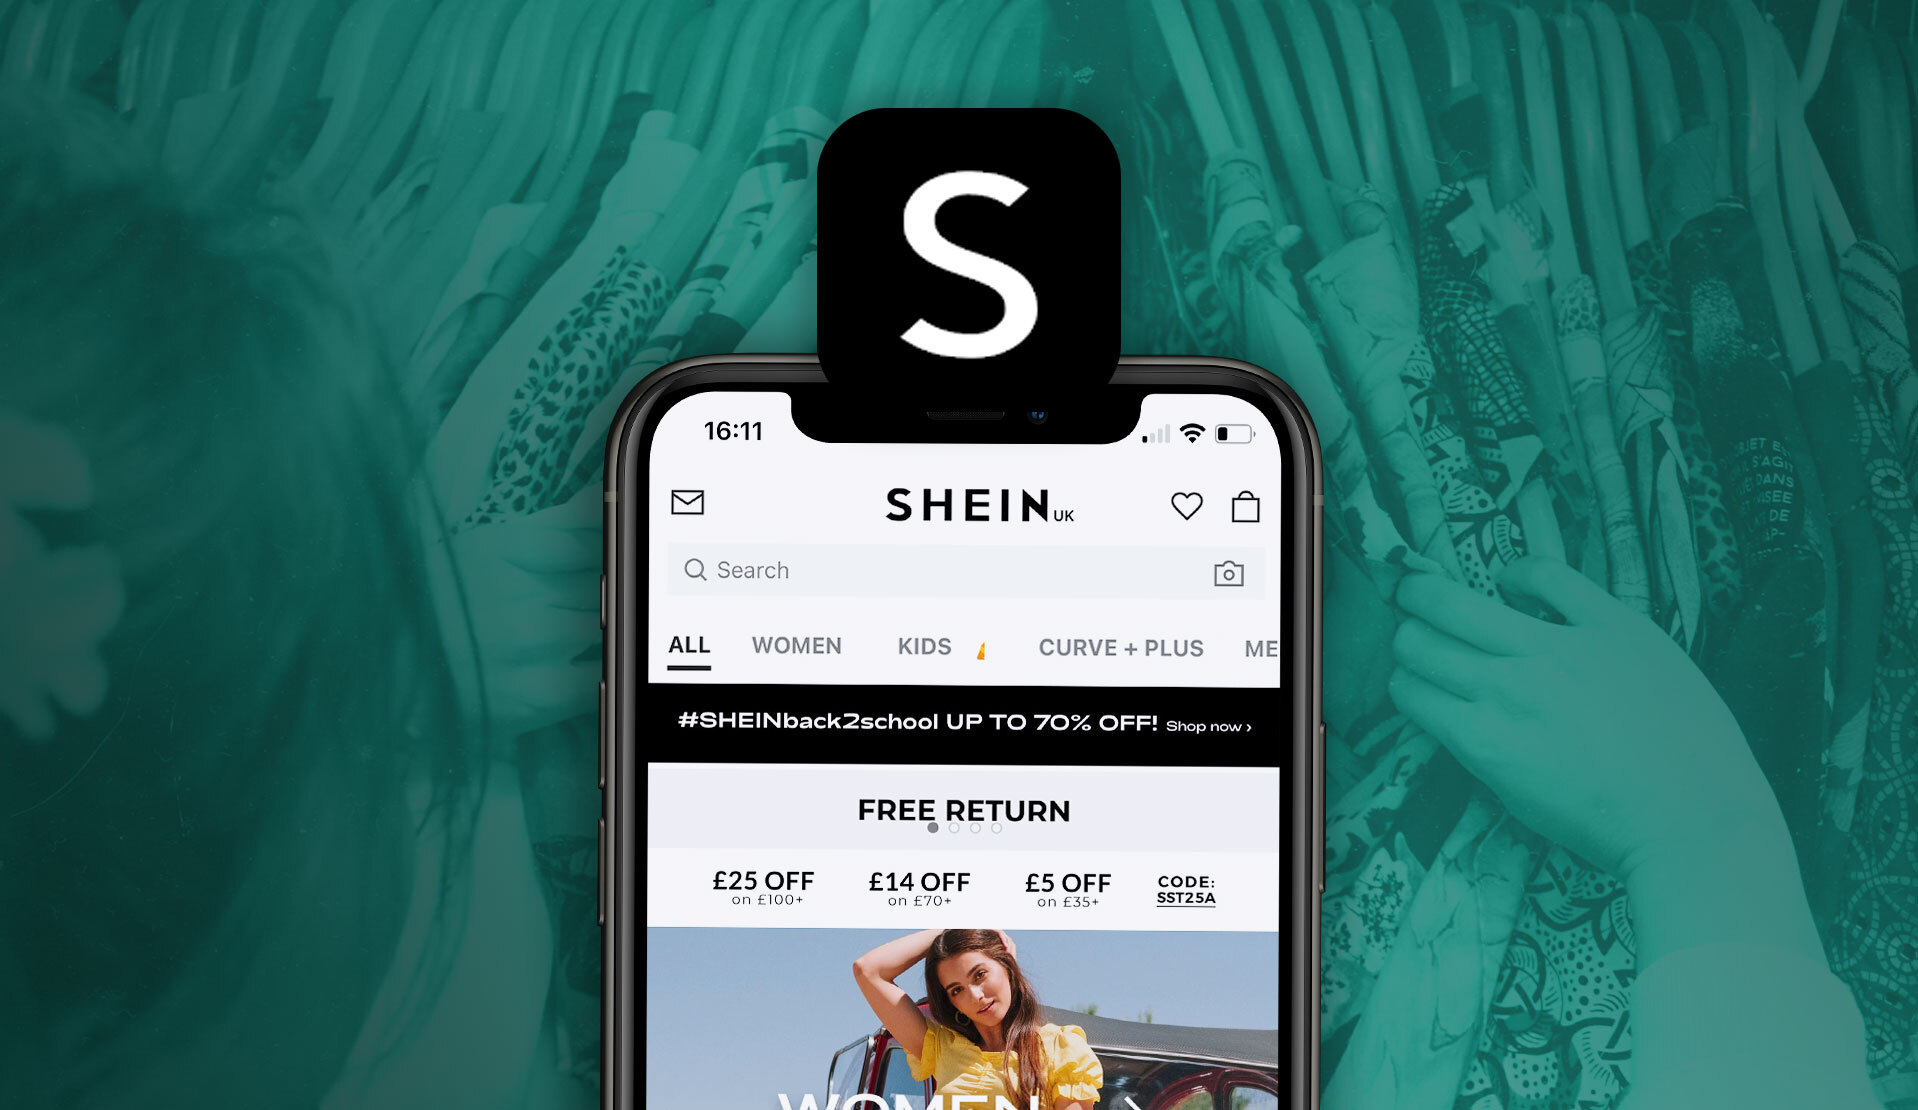 new clothes bought using shein coupon codes